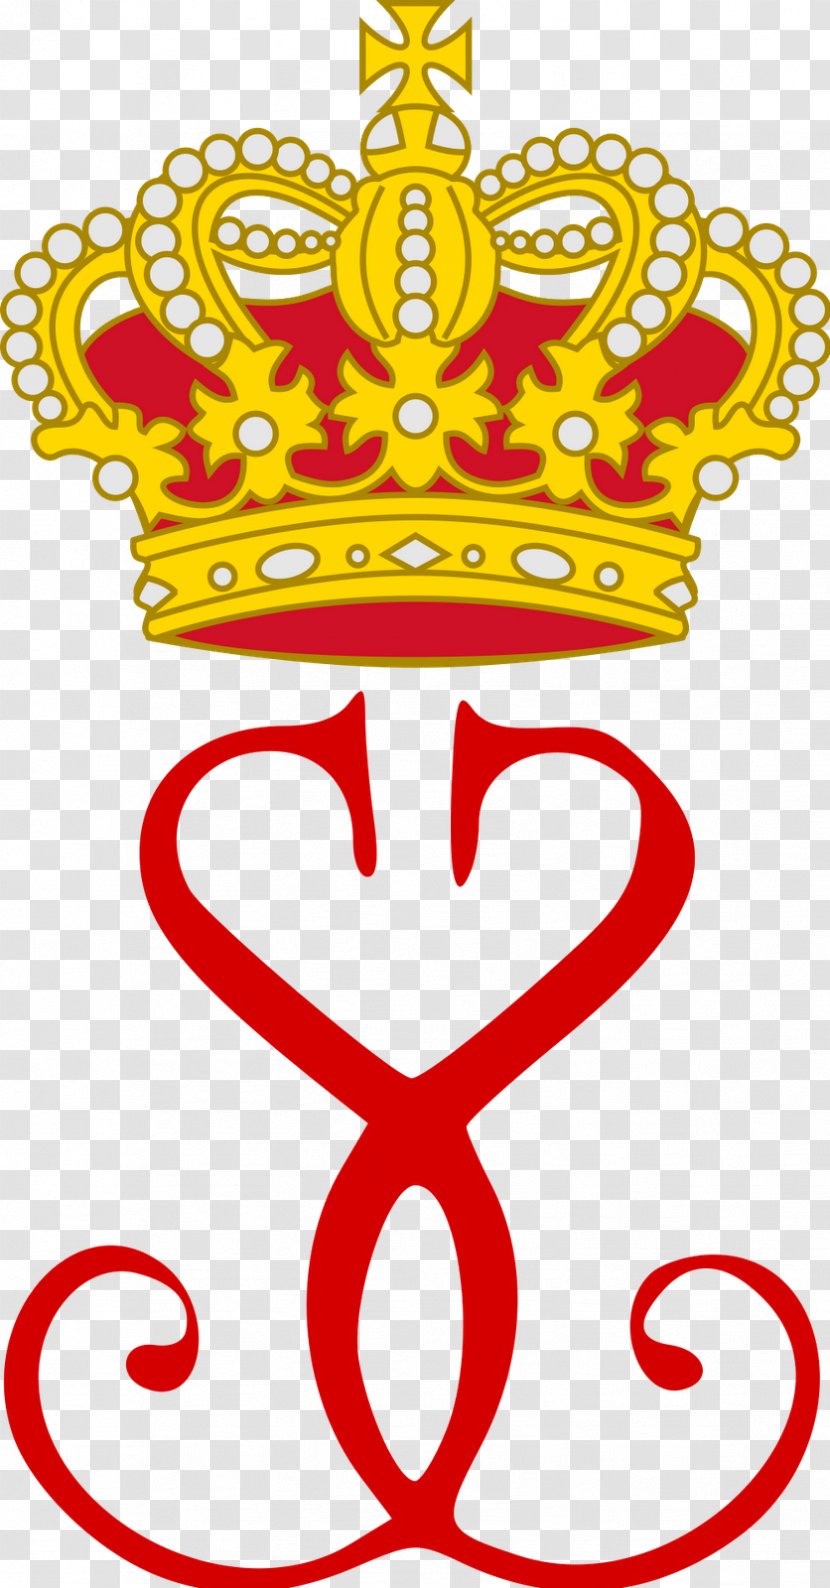 Prince's Palace Of Monaco Monogram Royal Cypher Coat Arms Hassana - Television Society Transparent PNG